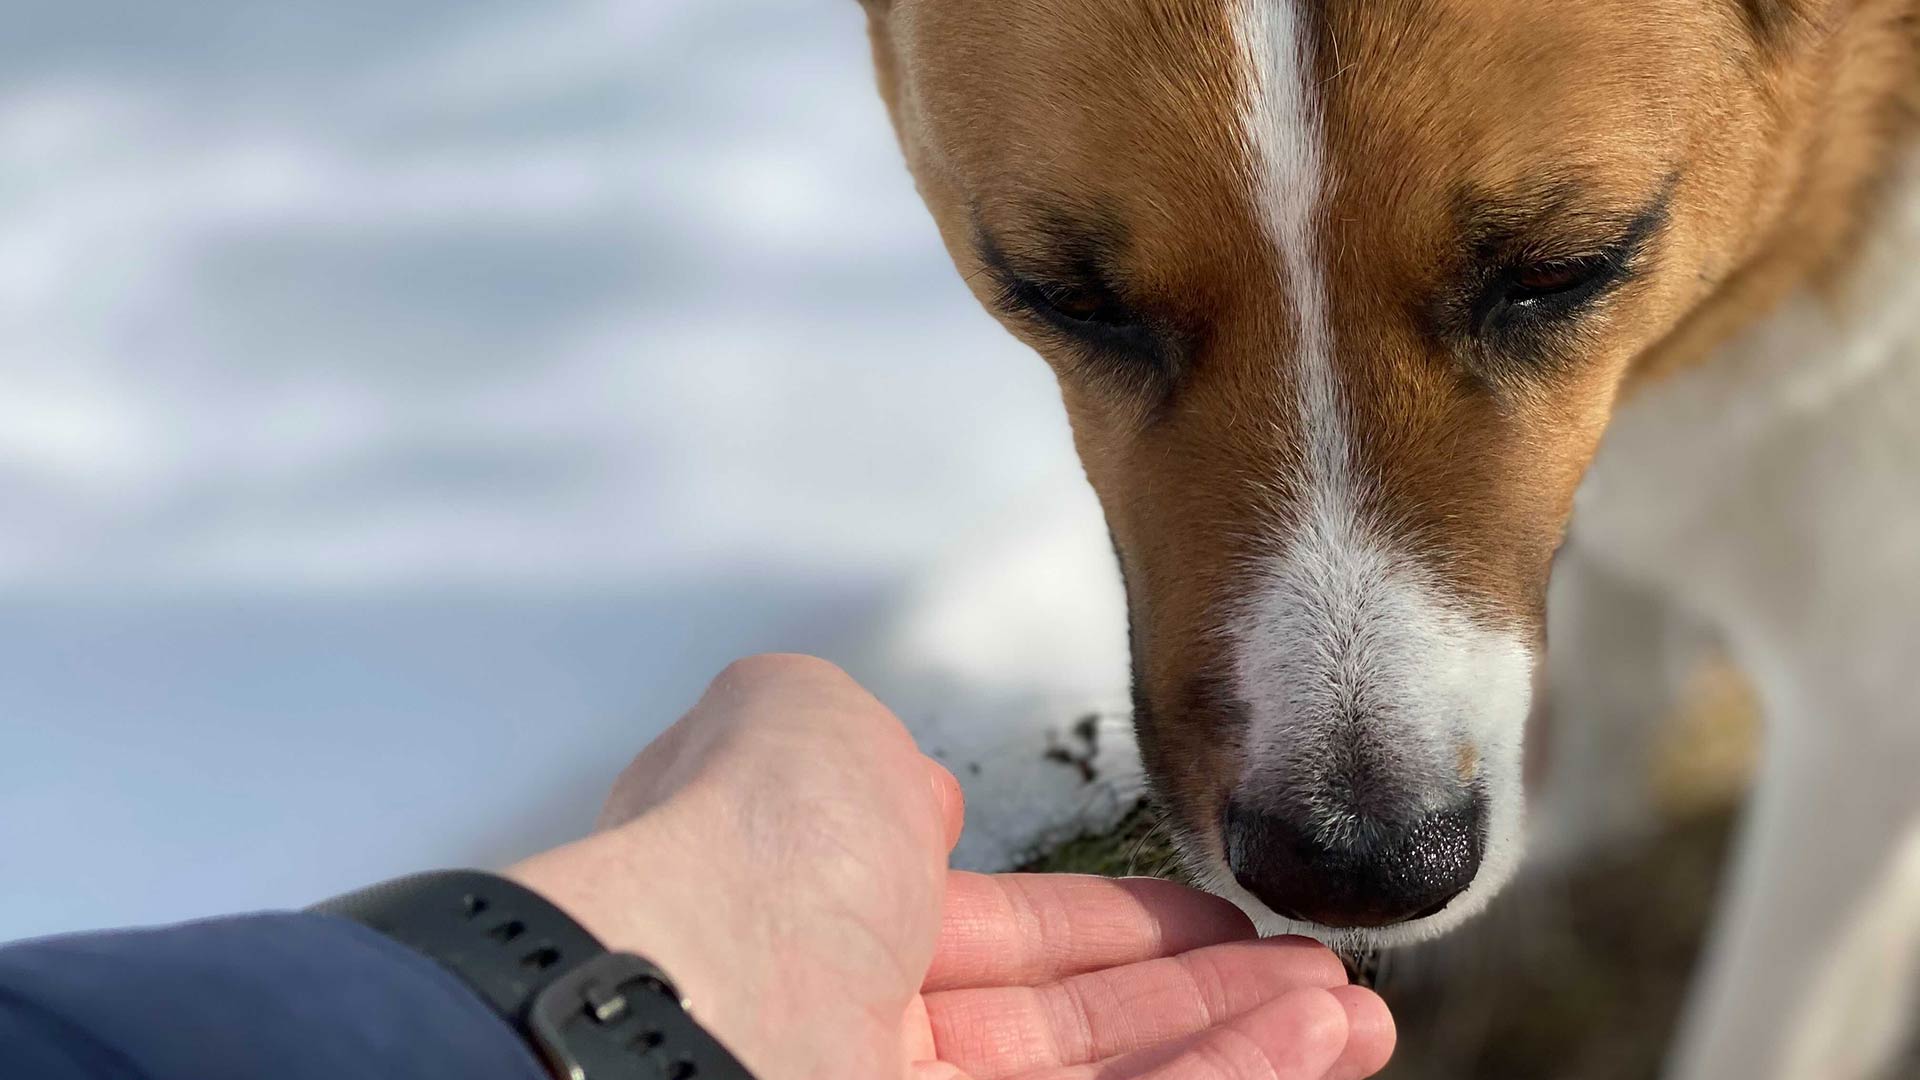 photo of a dog sniffing a hand